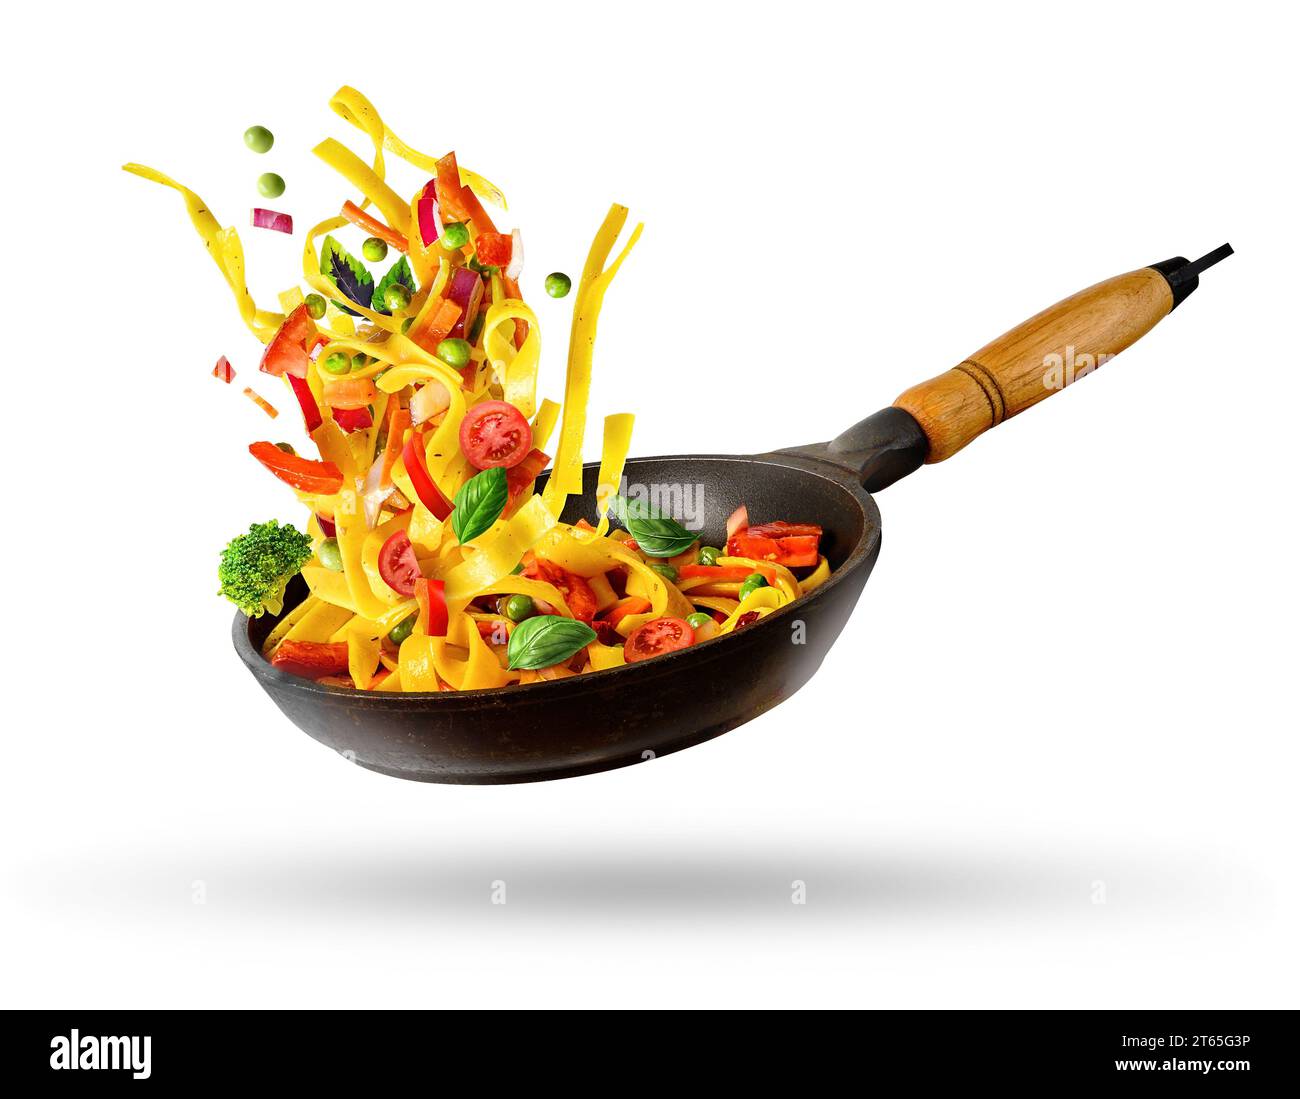 https://c8.alamy.com/comp/2T65G3P/cooking-italian-pasta-with-vegetables-flying-over-a-hot-frying-pan-isolated-in-white-the-concept-of-food-levitation-2T65G3P.jpg